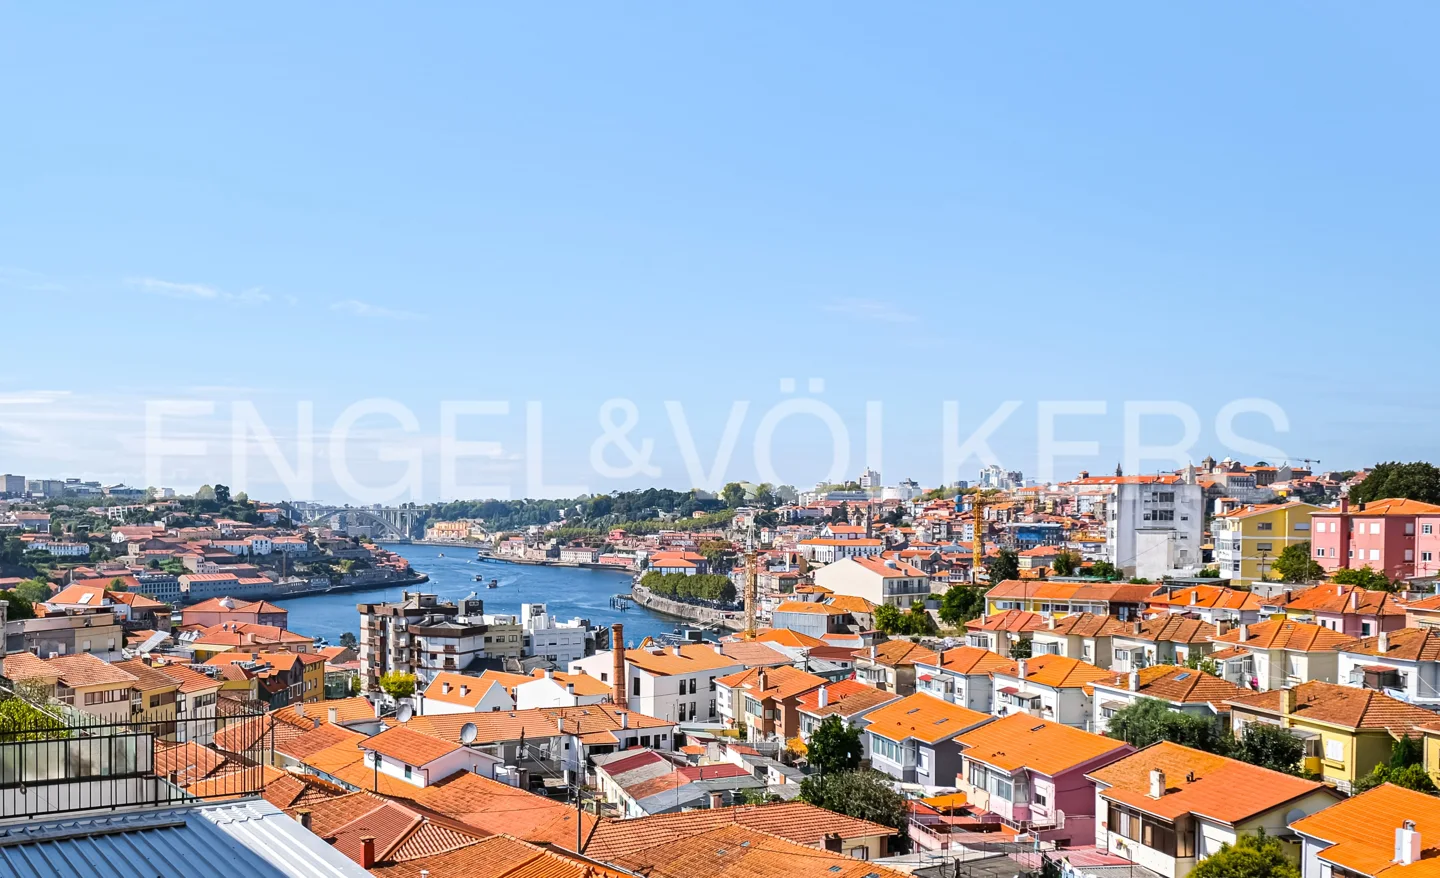 1 bedroom duplex apartment with magnificent views of the Douro River